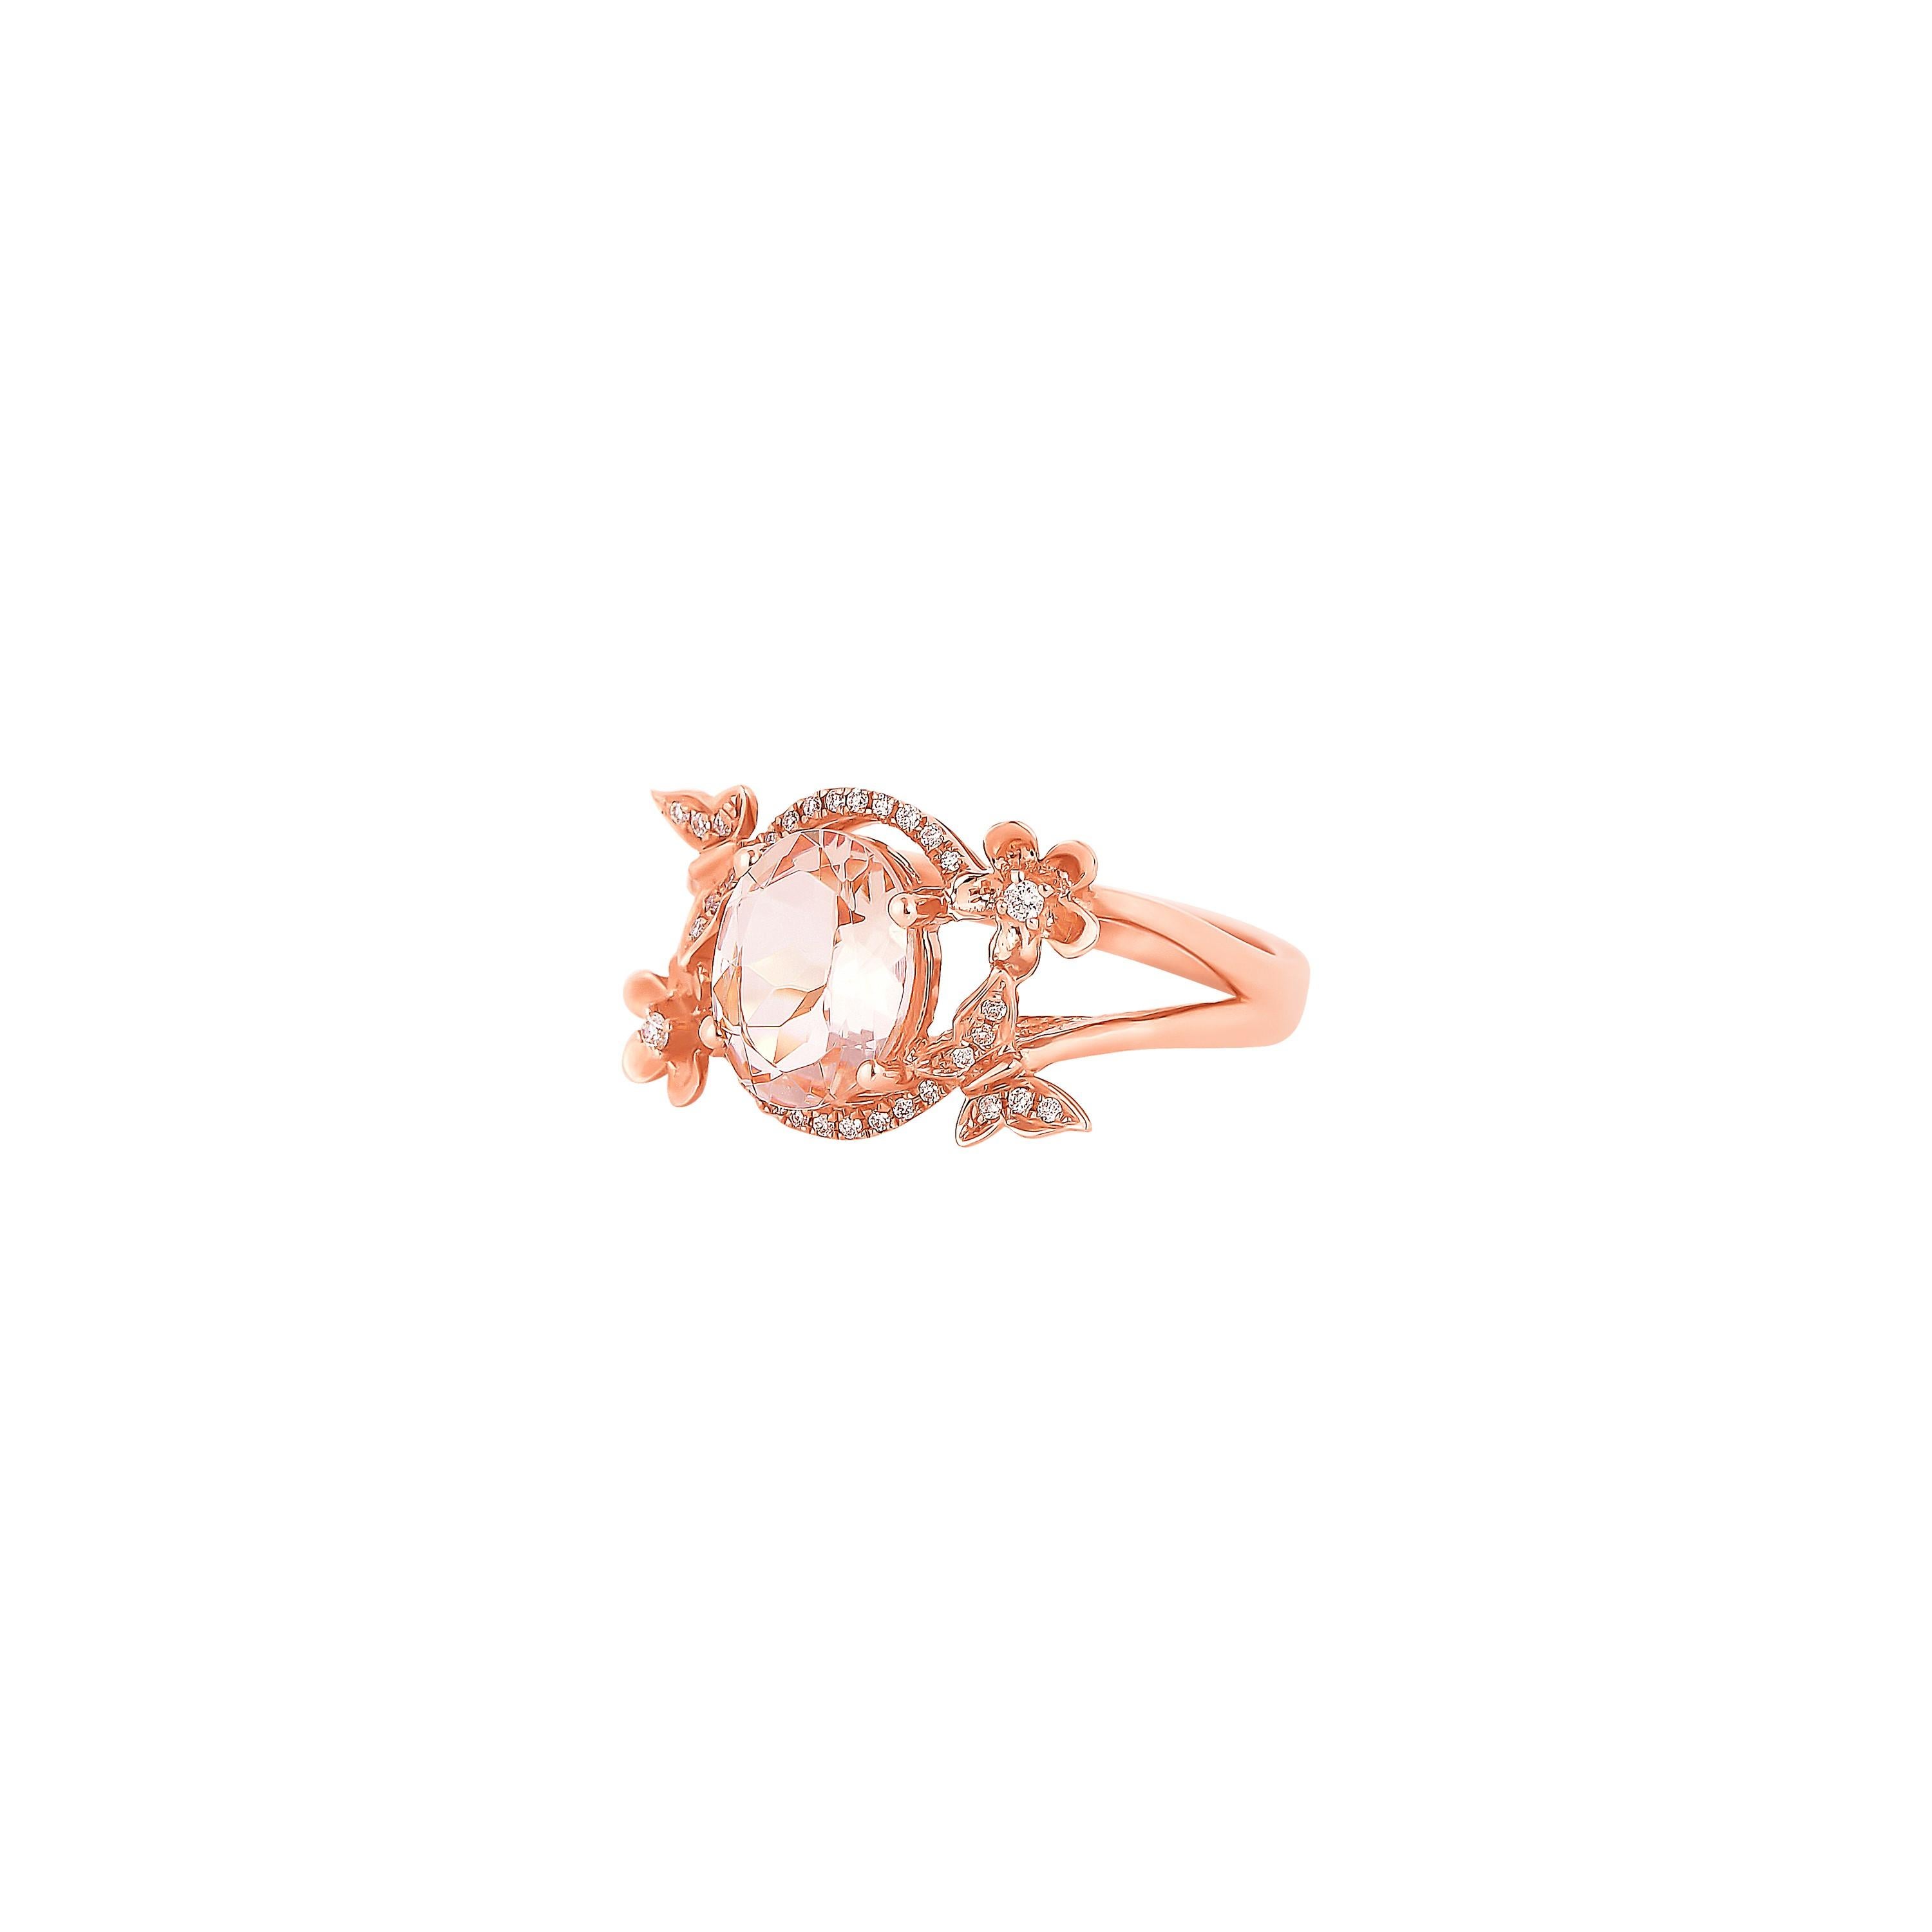 Oval Cut 1.47 Carat Morganite and Diamond Ring in 18 Karat Rose Gold For Sale